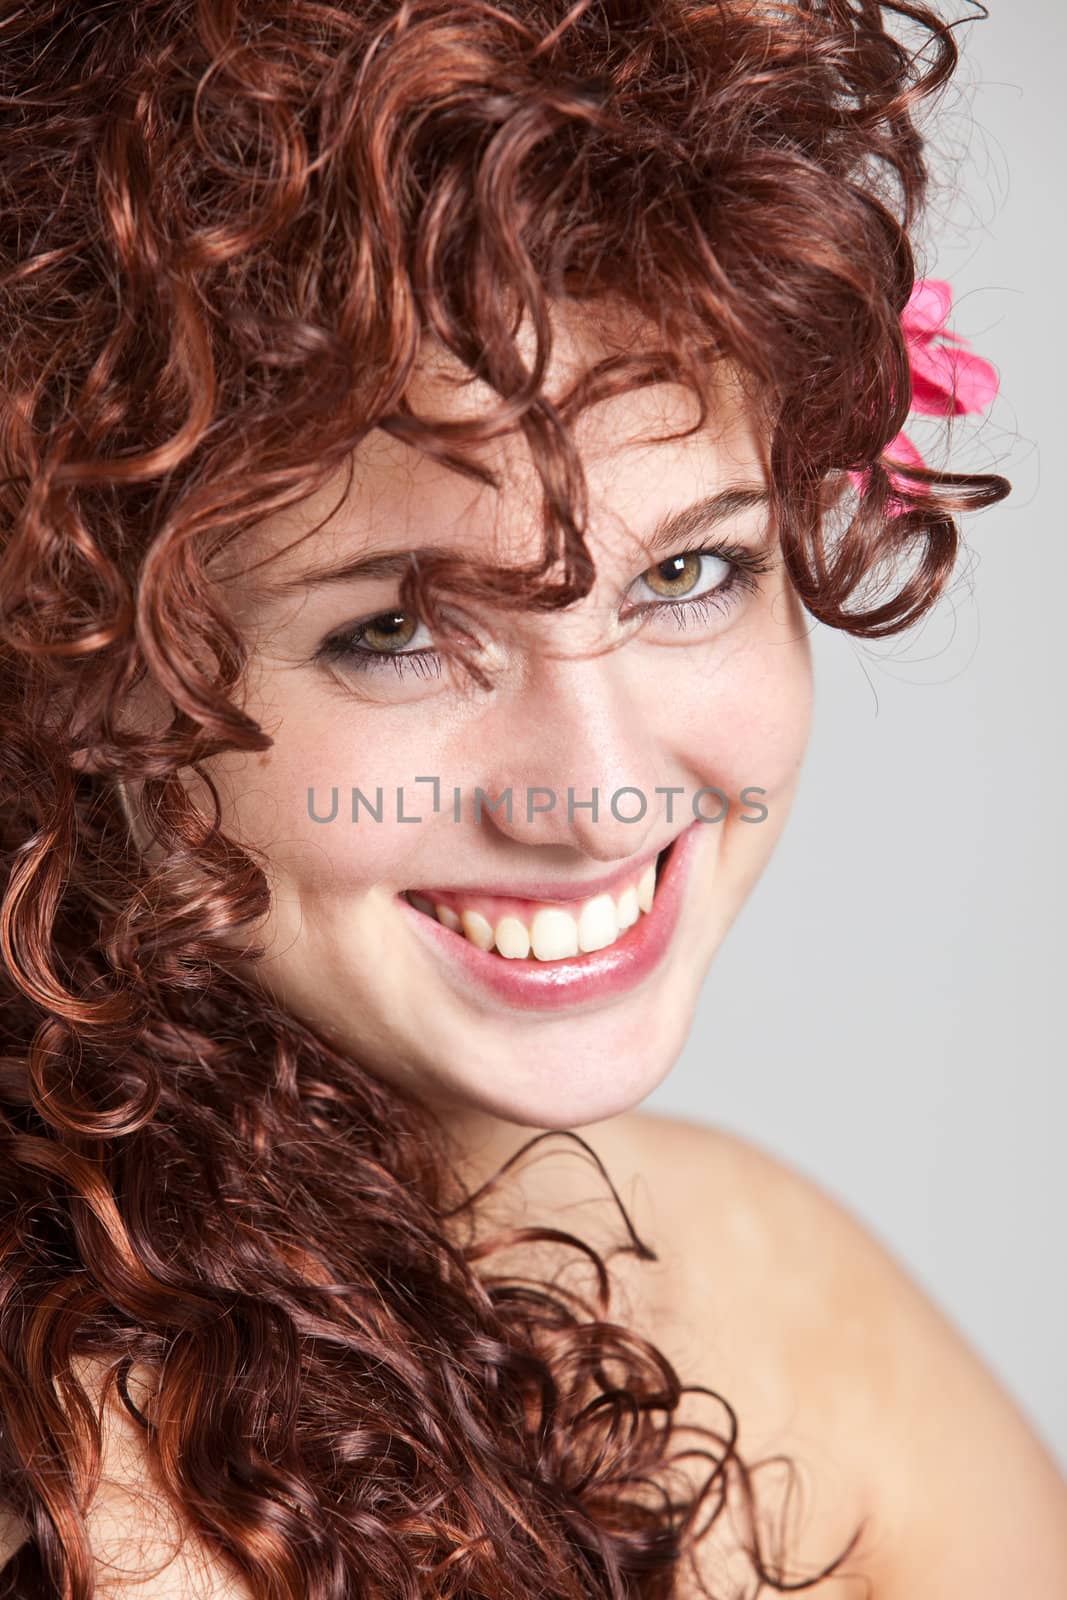 Beautiful redhaired girl in closeup portrait smiling happily